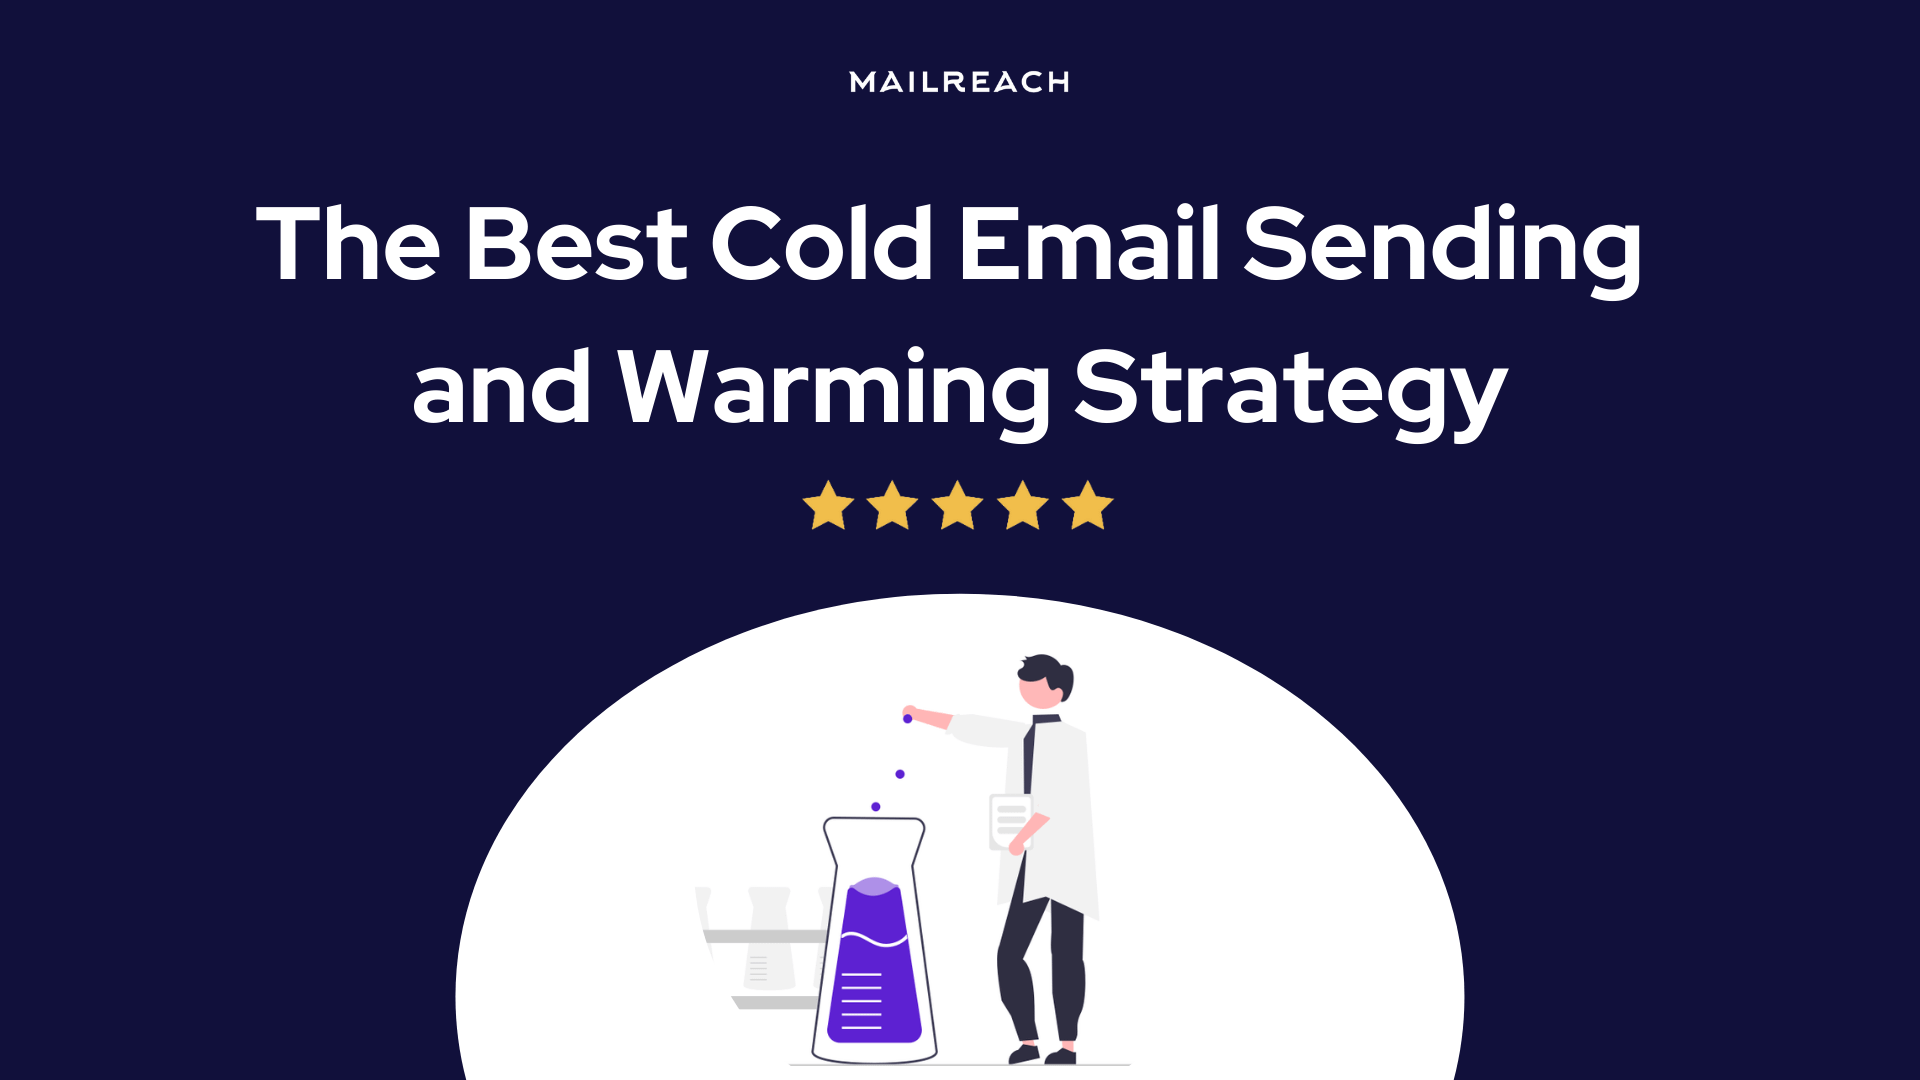 The best cold email sending and warming strategy to avoid landing in spam